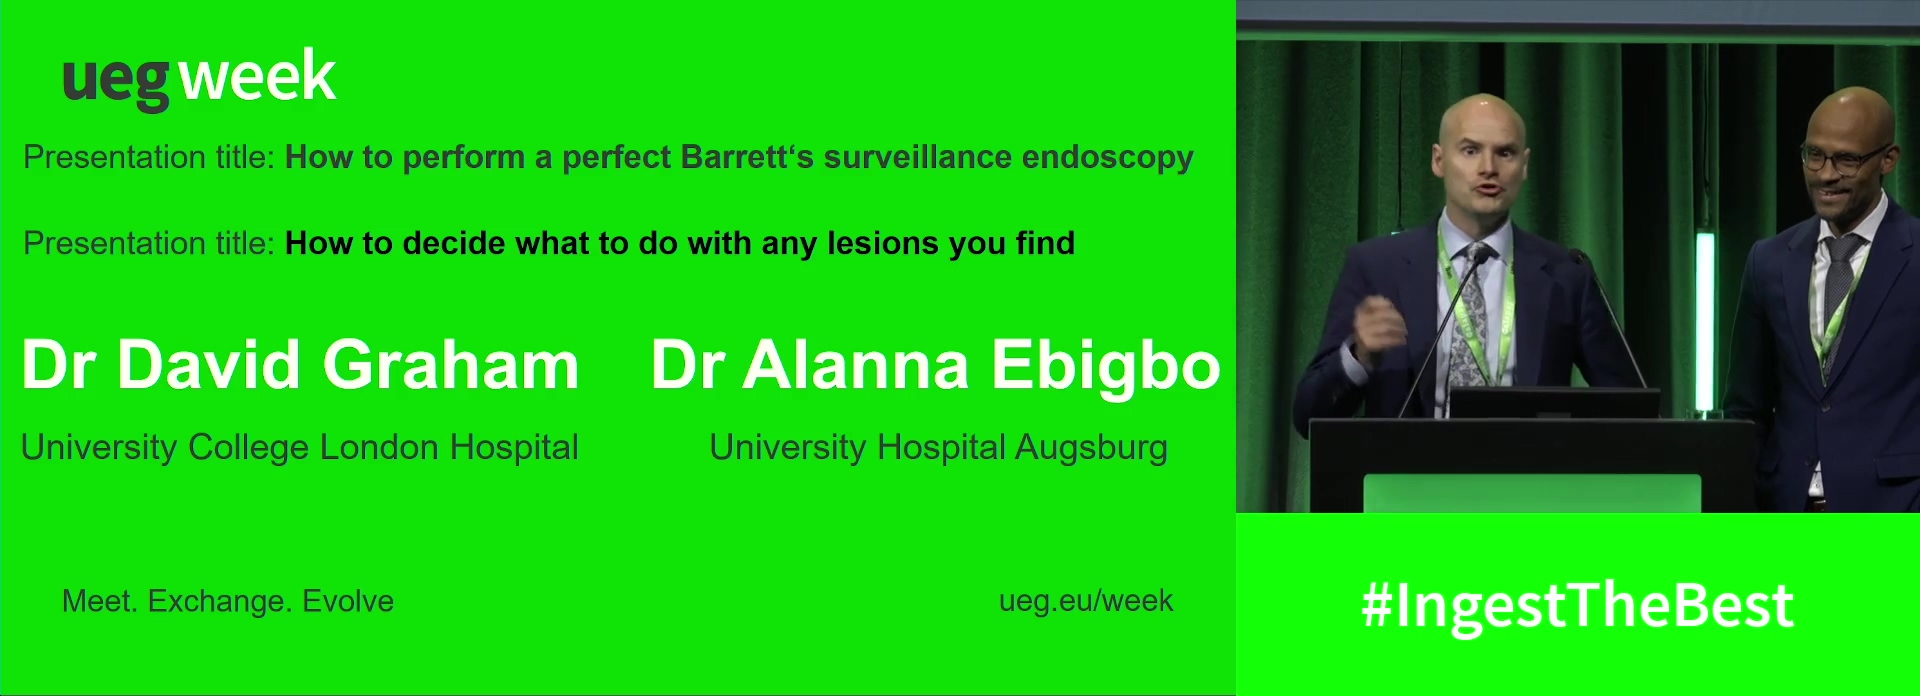 Video Case: How to perform a perfect Barrett's surveillance endoscopy and how to decide what to do with any lesions you find